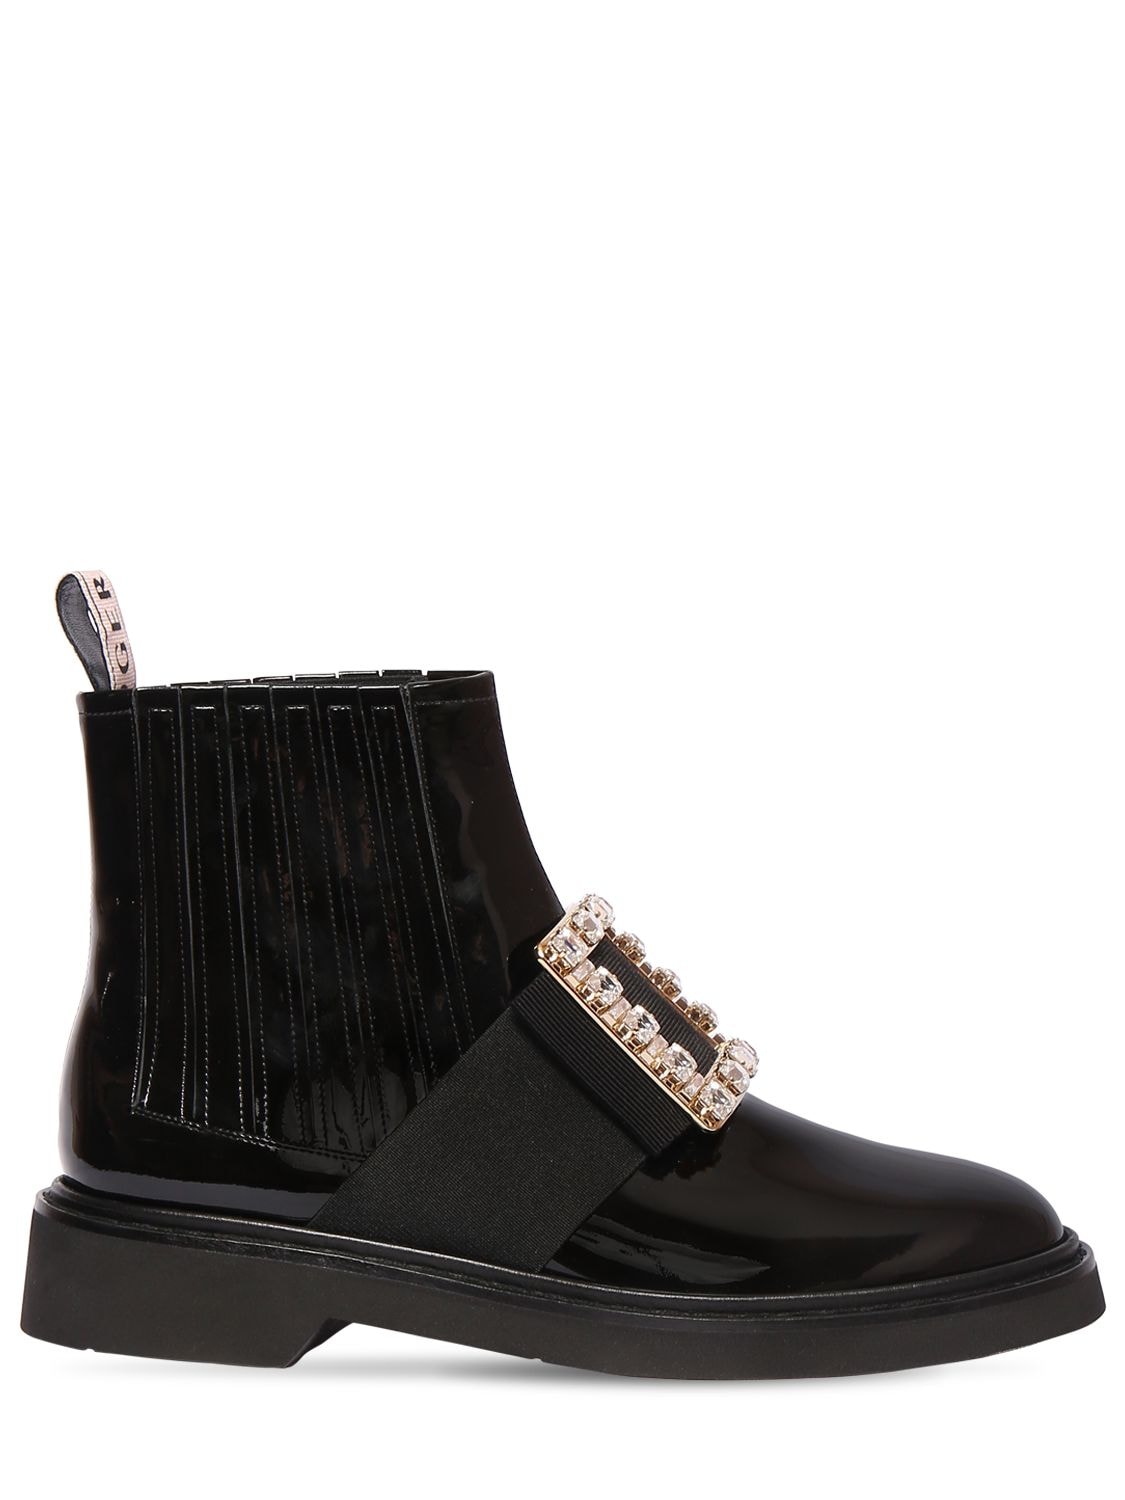 Roger Vivier 25mm Viv Rangers Patent Leather Boots In Nero